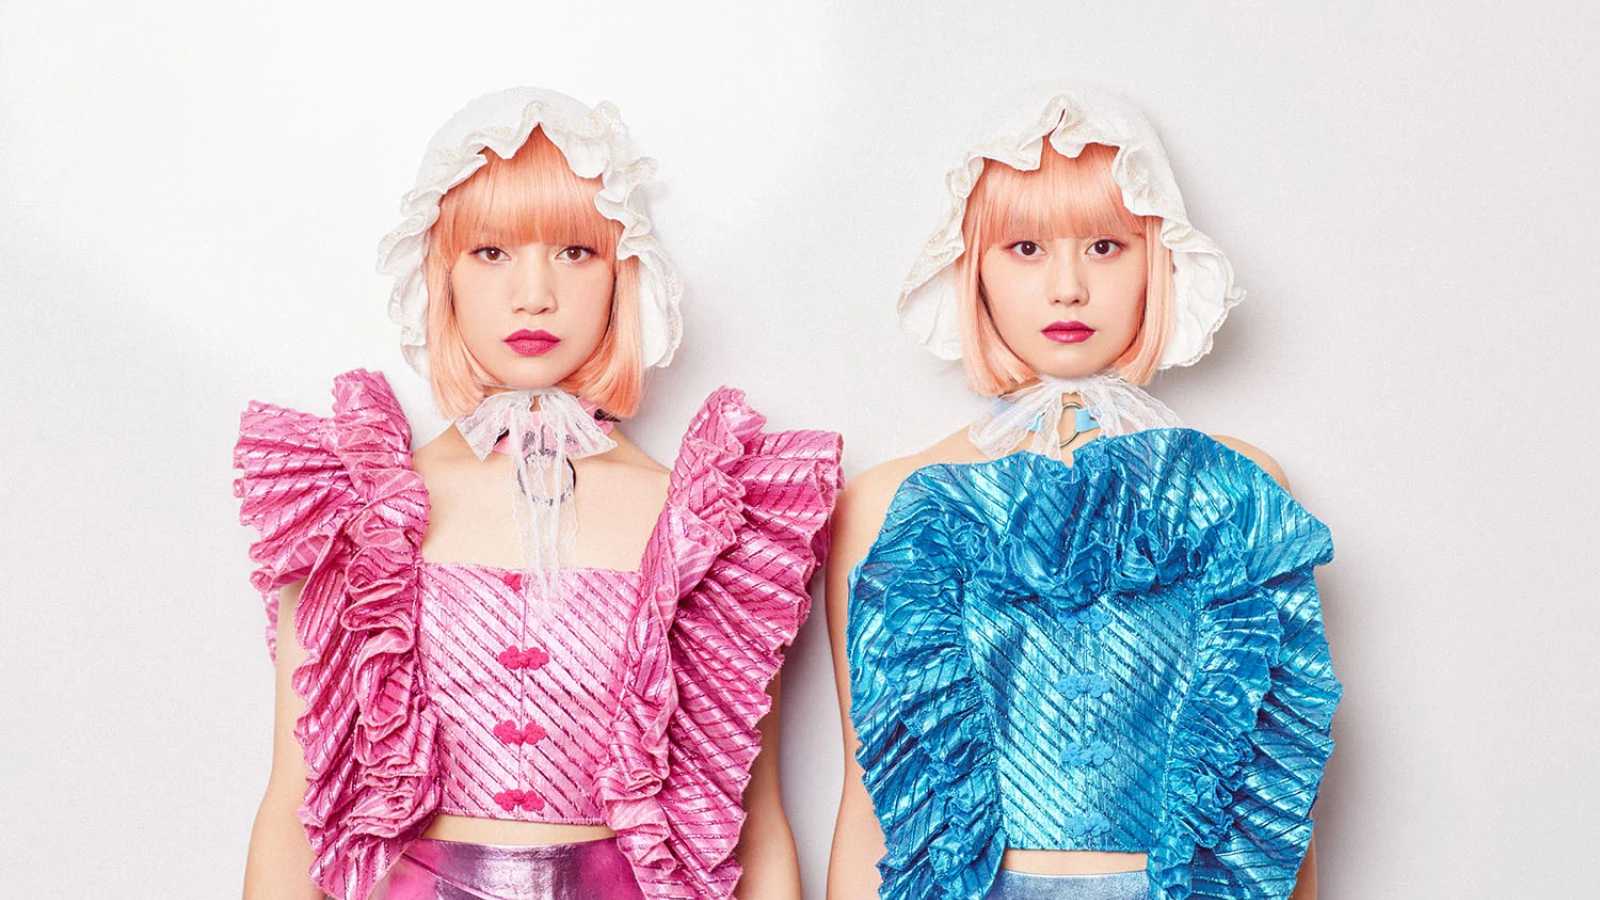 FEMM Releases Final EP © FEMM. All rights reserved.